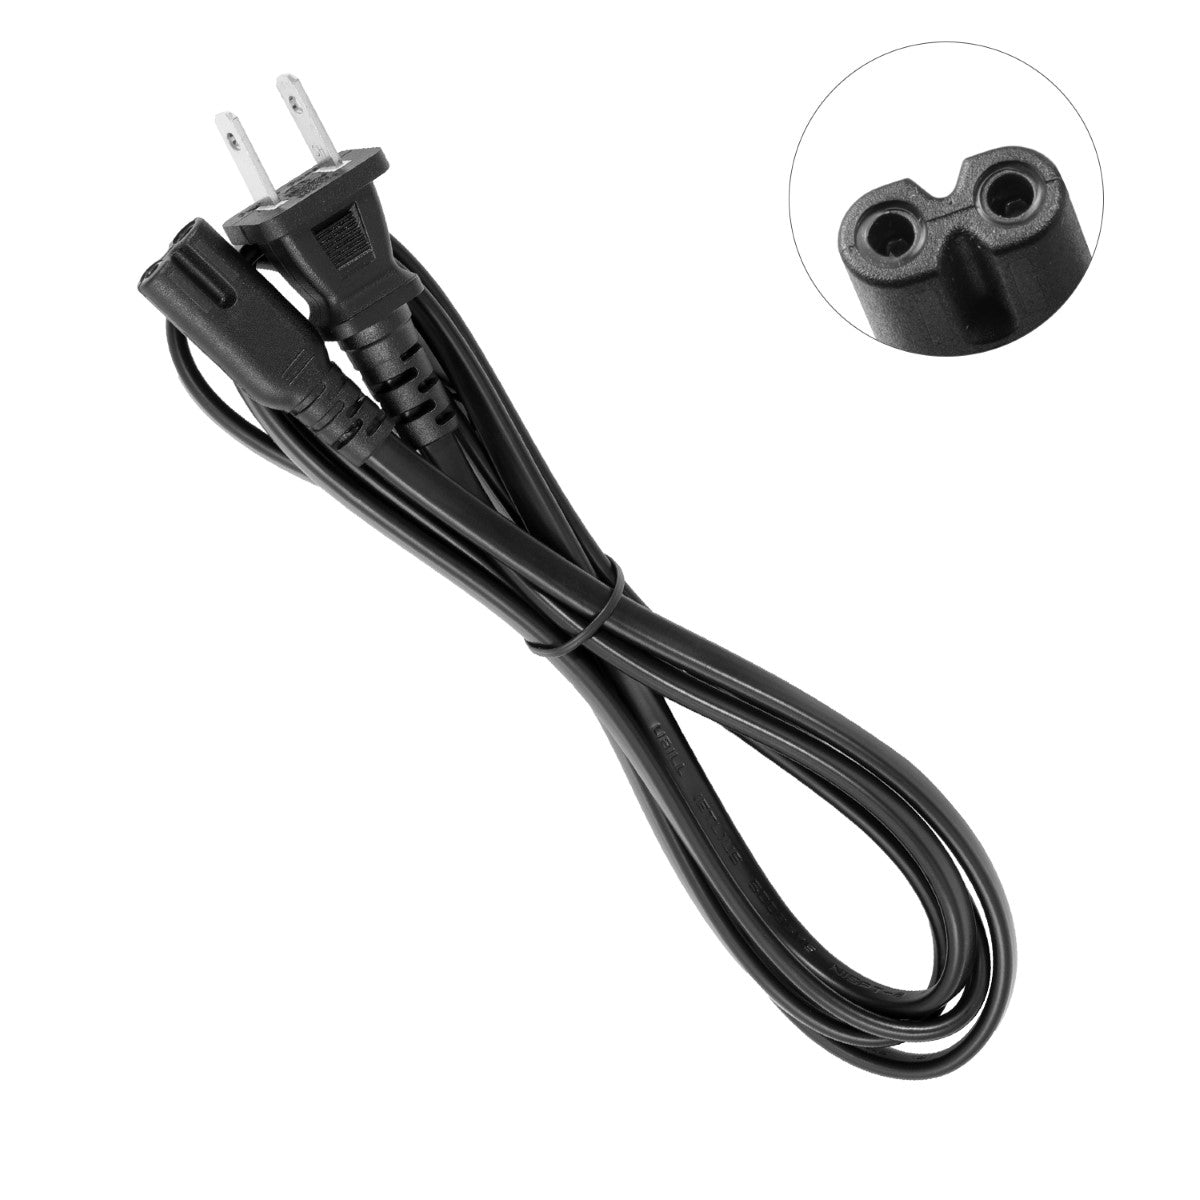 Power Cord for HP ENVY 4503 e-All-in-One Printer.